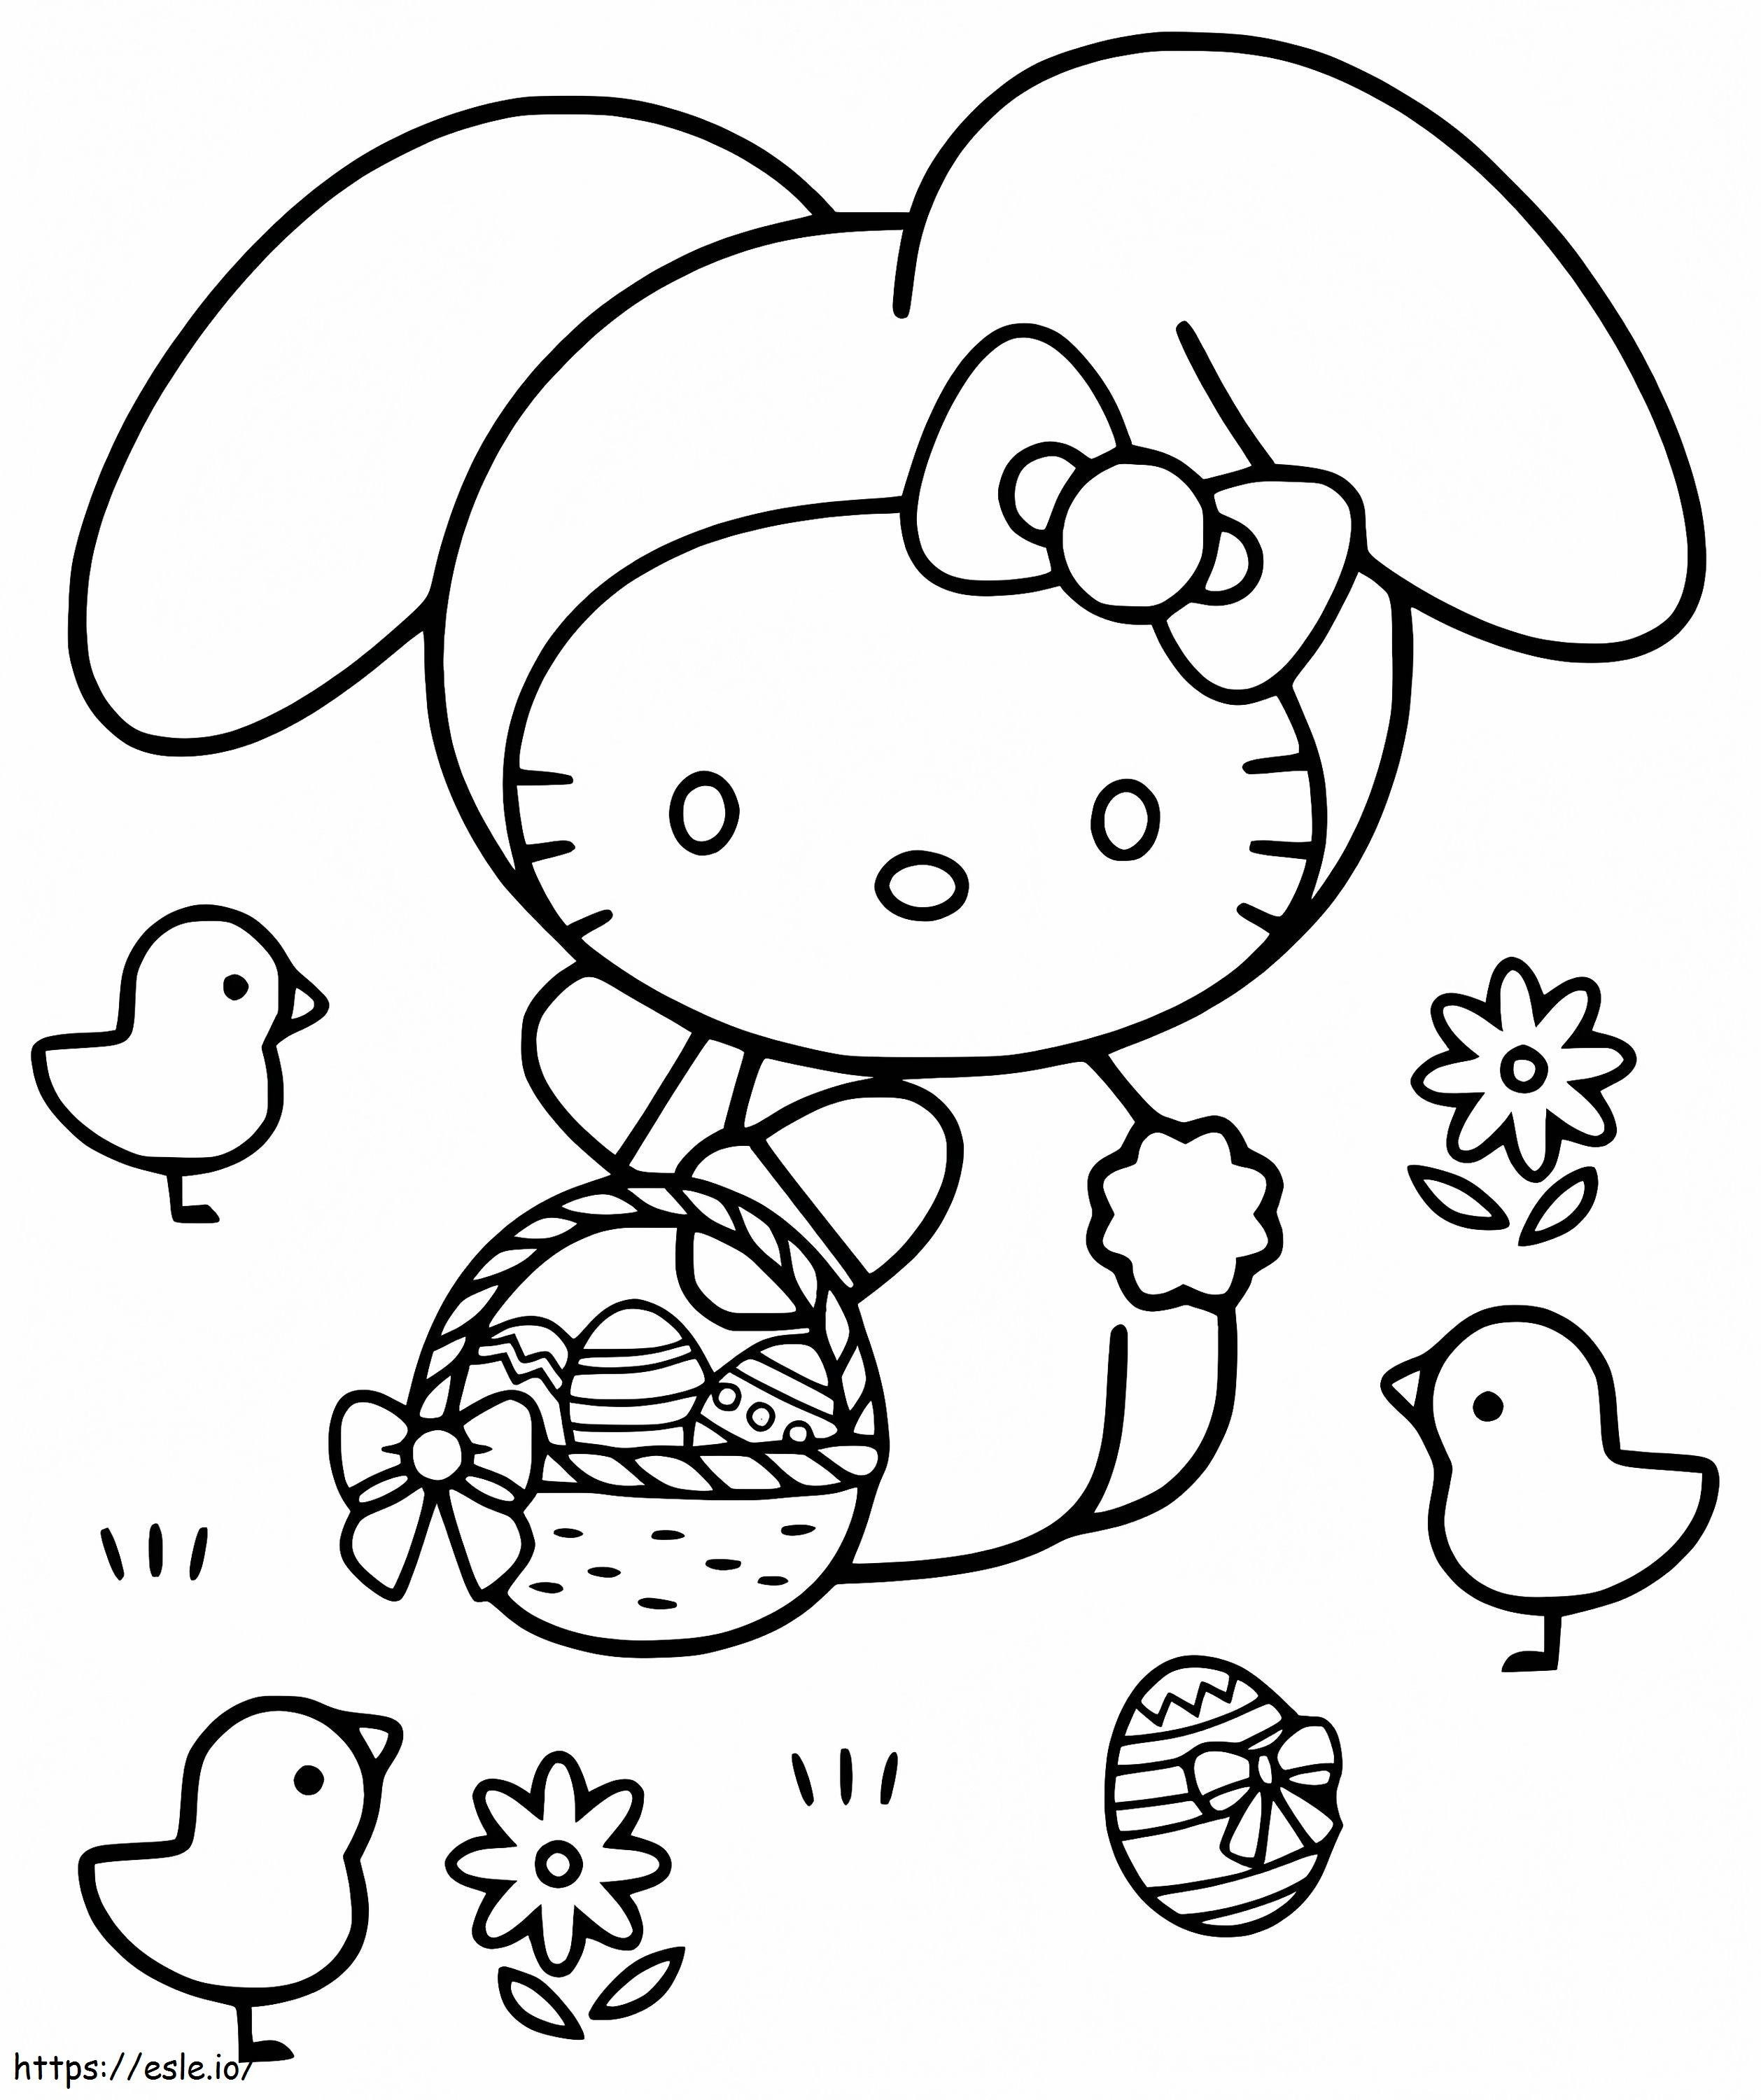 Easter Hello Kitty 1 coloring page